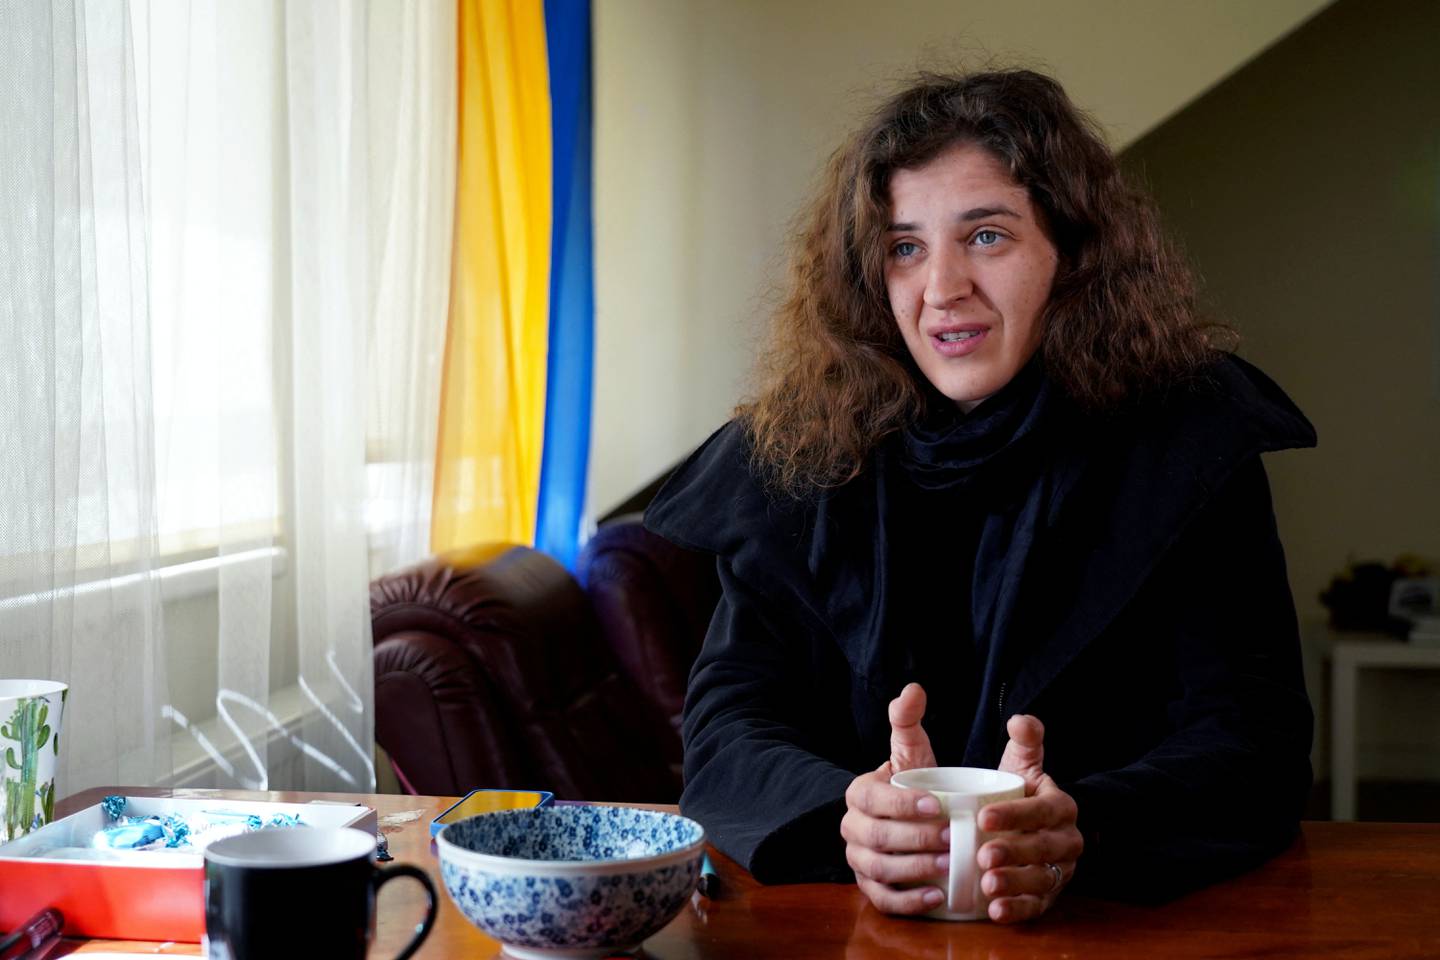 Hanna Bilobrova, partner of Lithuanian film director Mantas Kvedaravicius who was found dead in Mariupol, Ukraine, during an interview with Reuters in Vilnius, Lithuania on April 14, 2022. Reuters